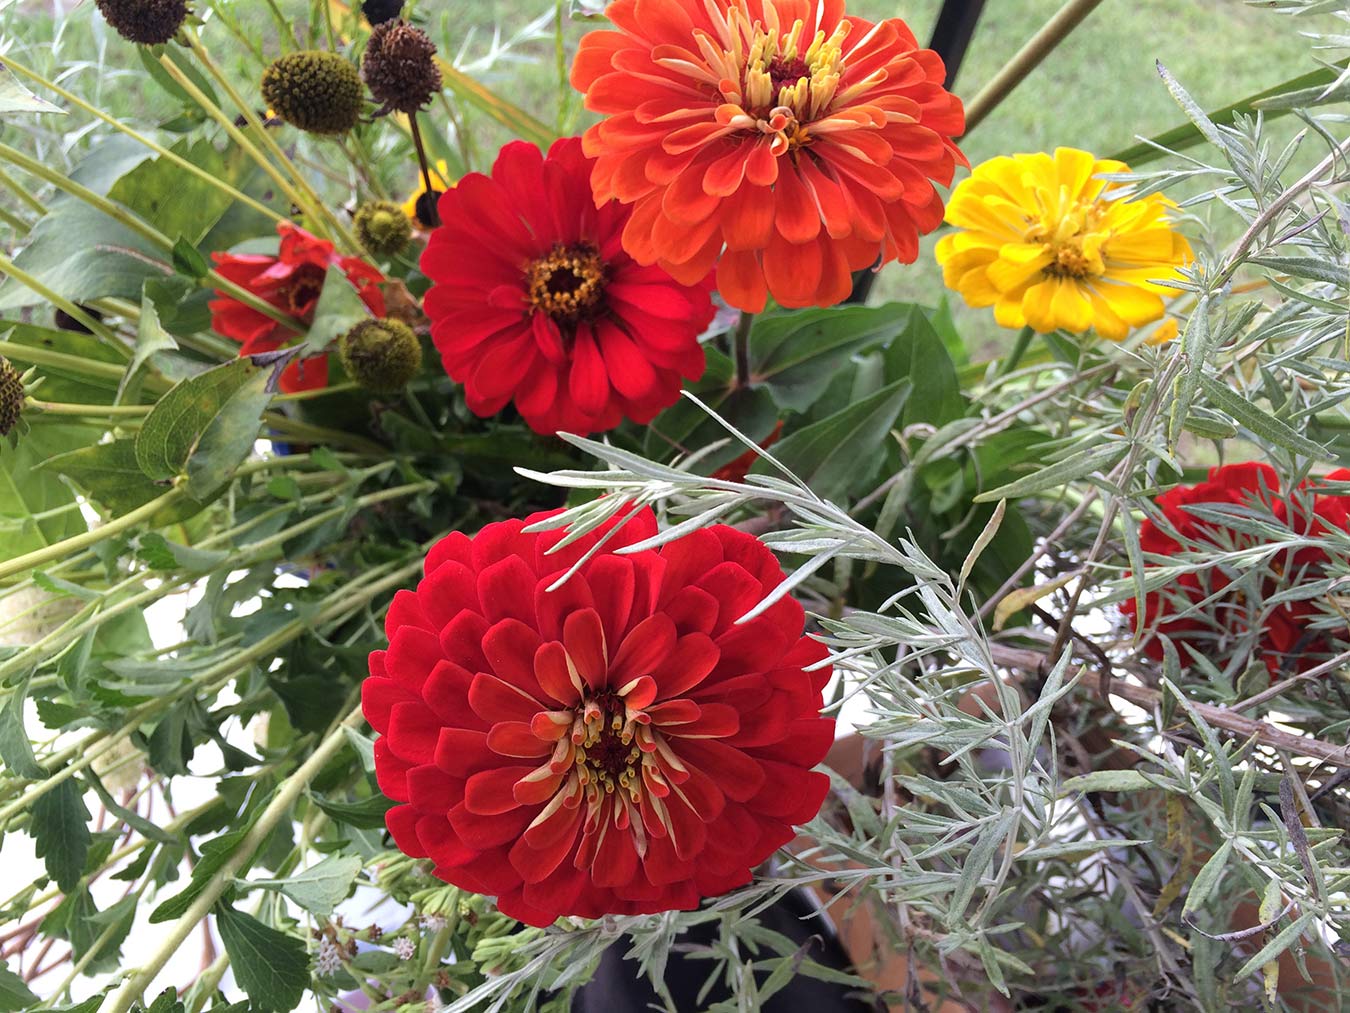 Red and yellow zinnias on a background of green leaves and silvery foliage.